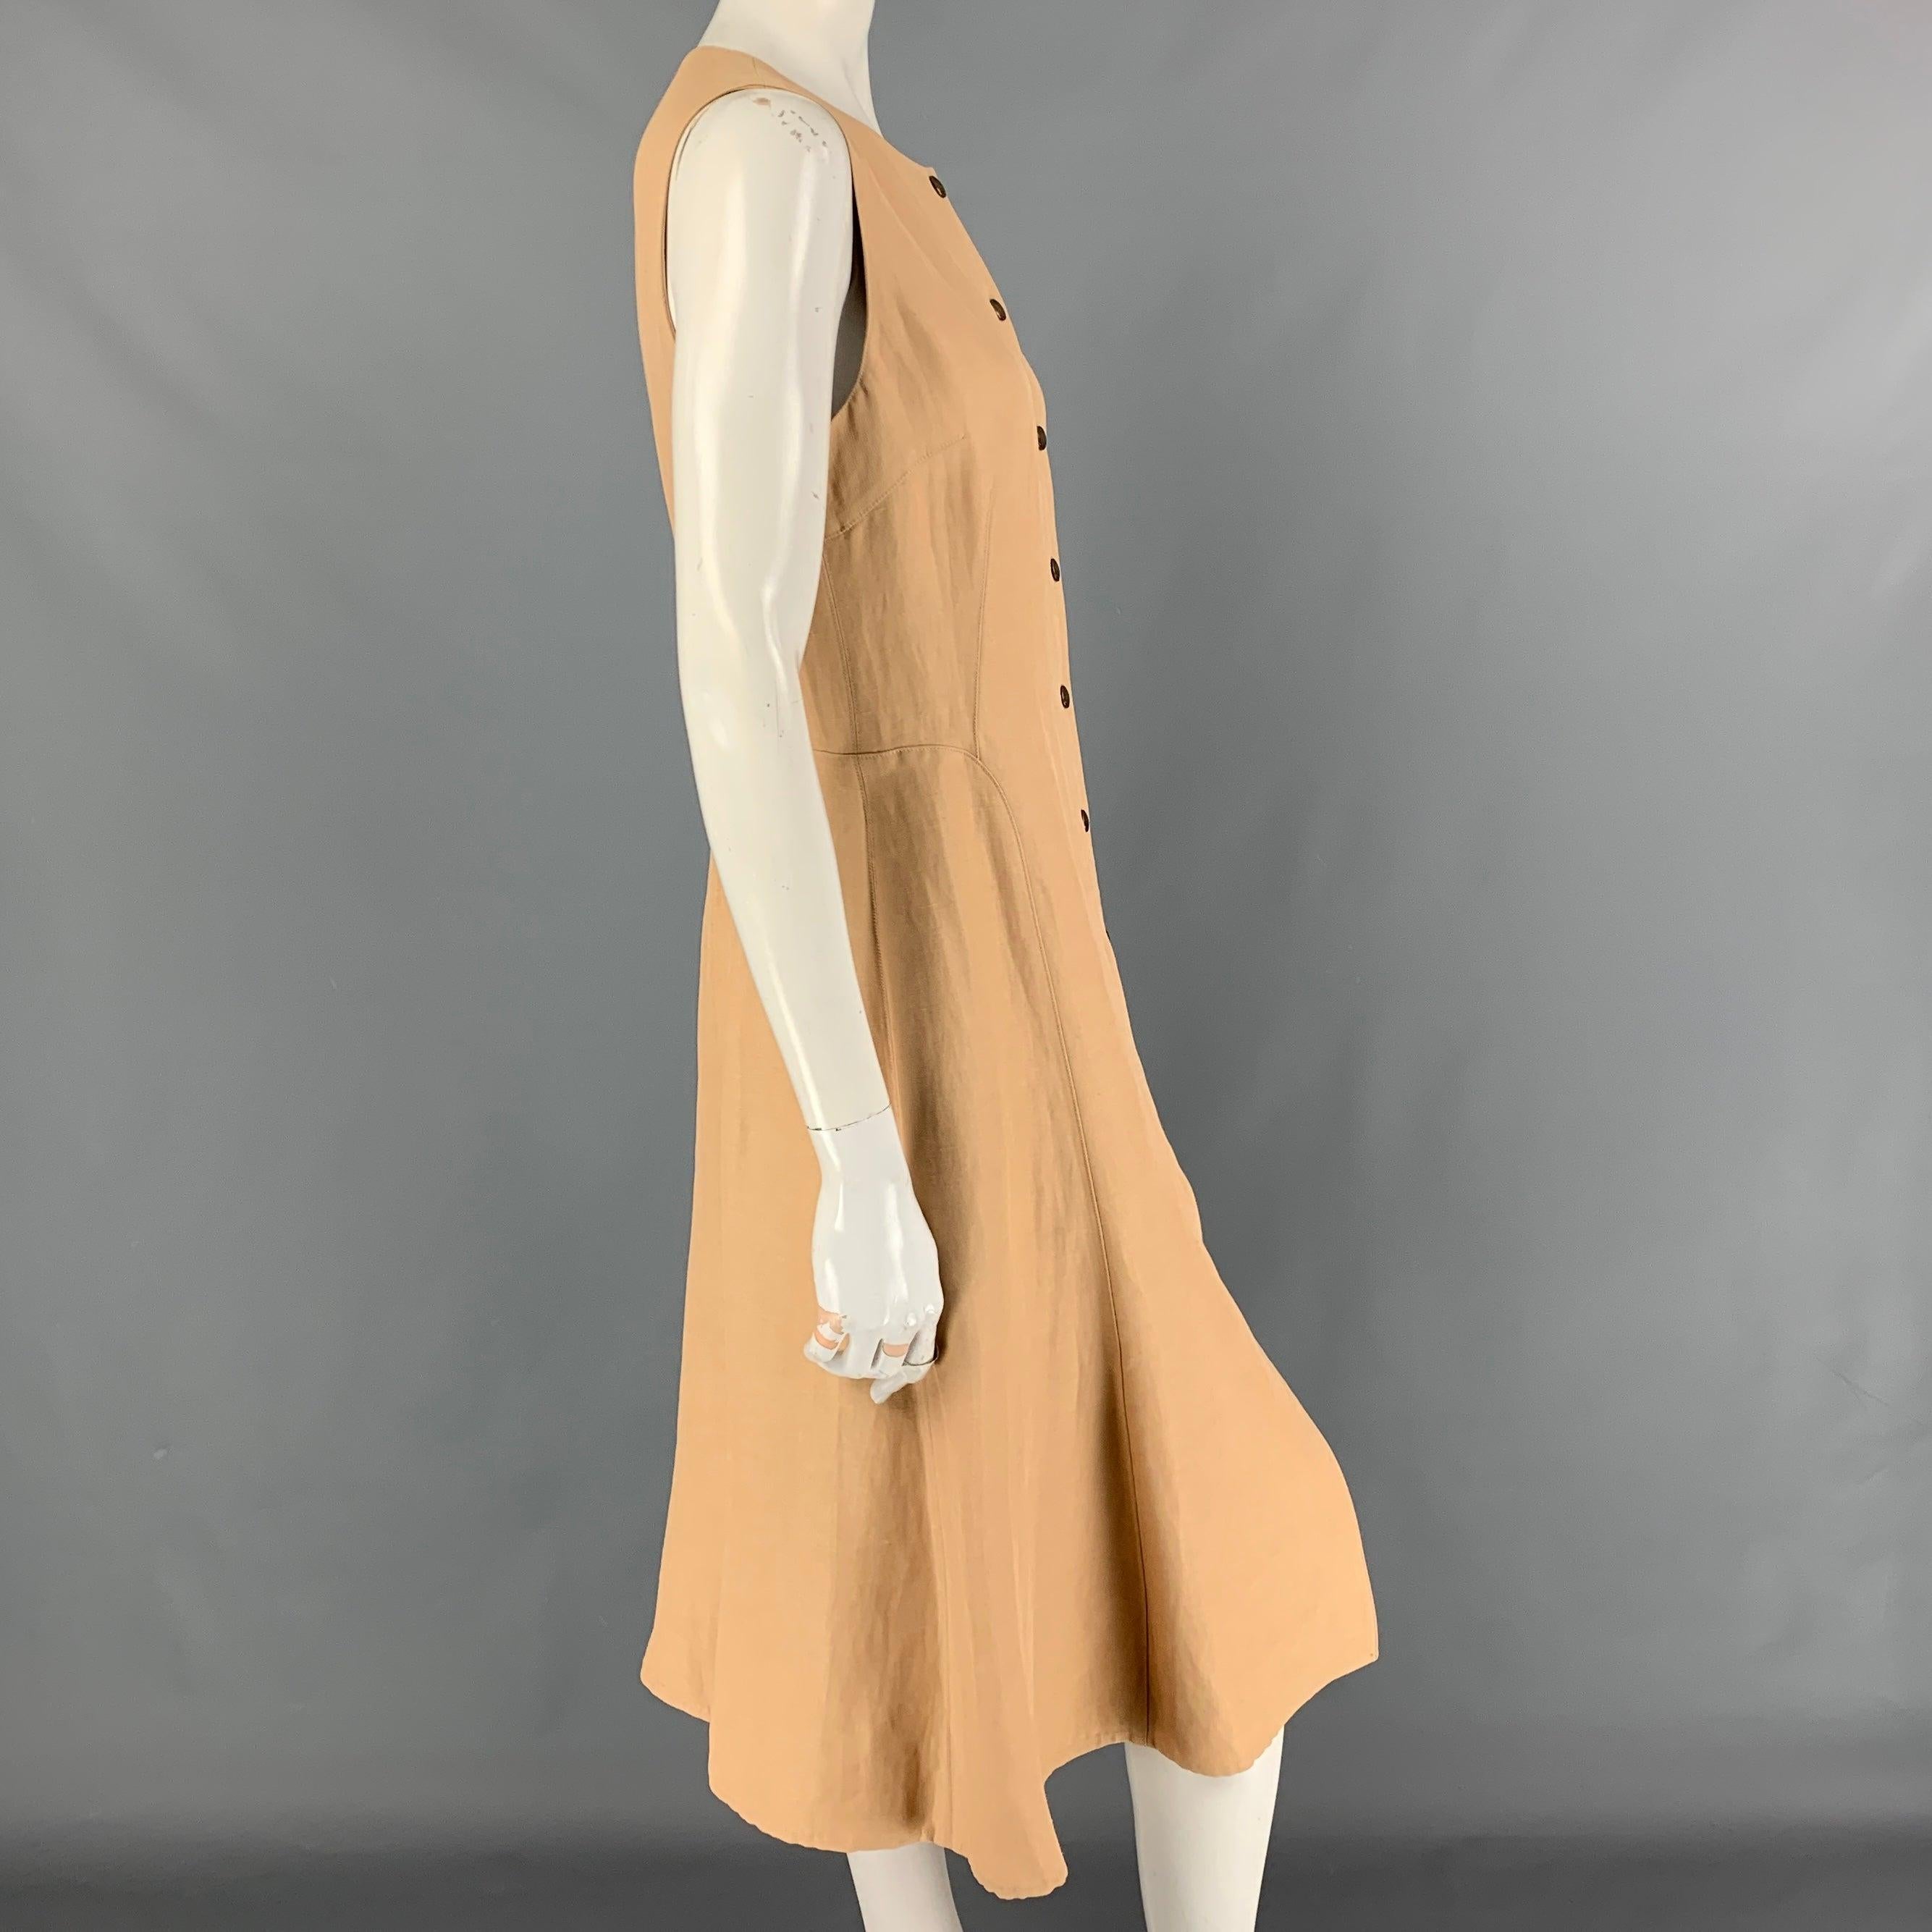 RALPH LAUREN Collection Size 8 Beige Acetate Blend Snaps Dress In Good Condition For Sale In San Francisco, CA